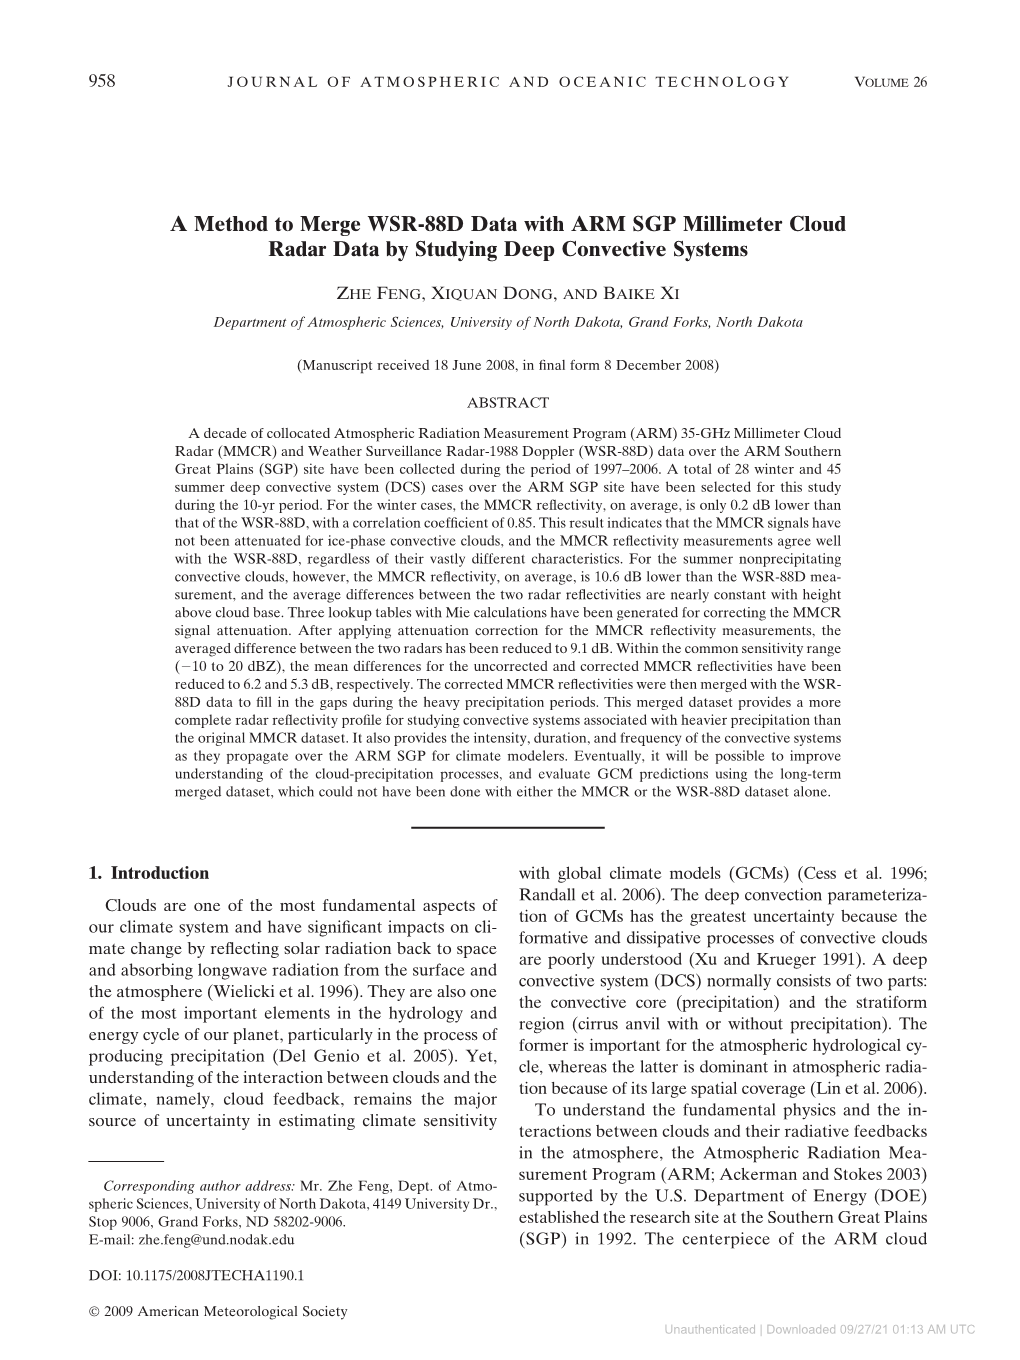 A Method to Merge WSR-88D Data with ARM SGP Millimeter Cloud Radar Data by Studying Deep Convective Systems